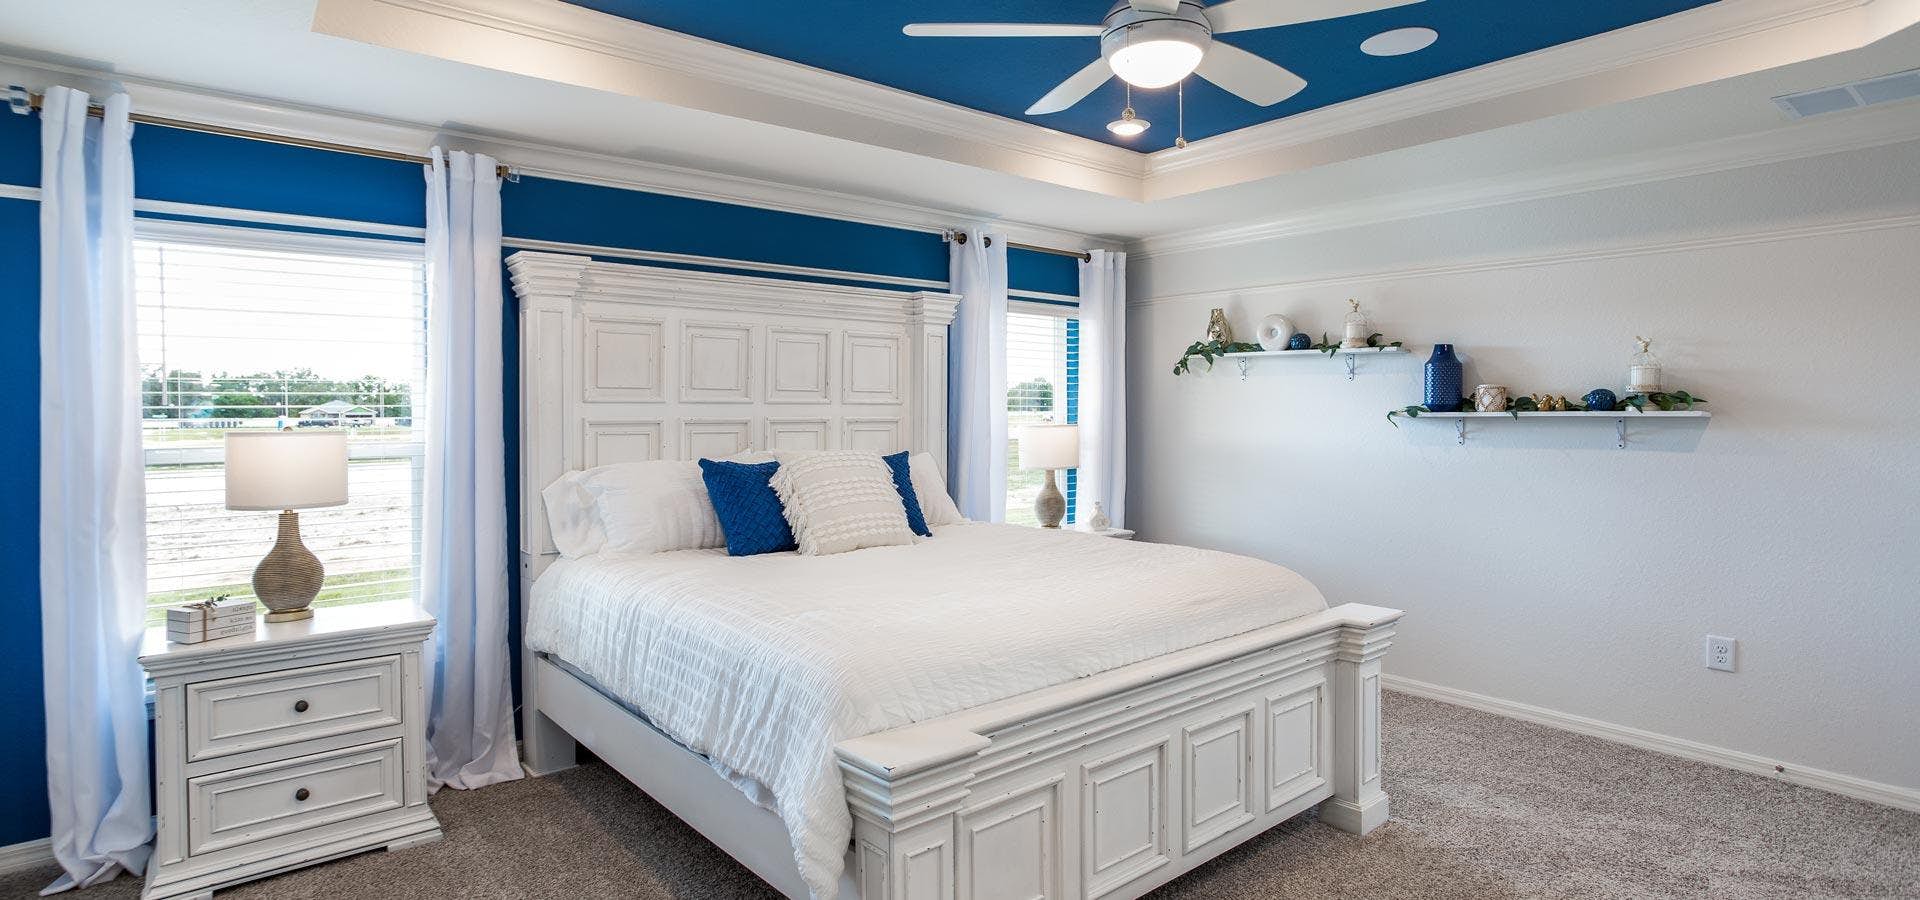 Bedrooms with blue accent paint